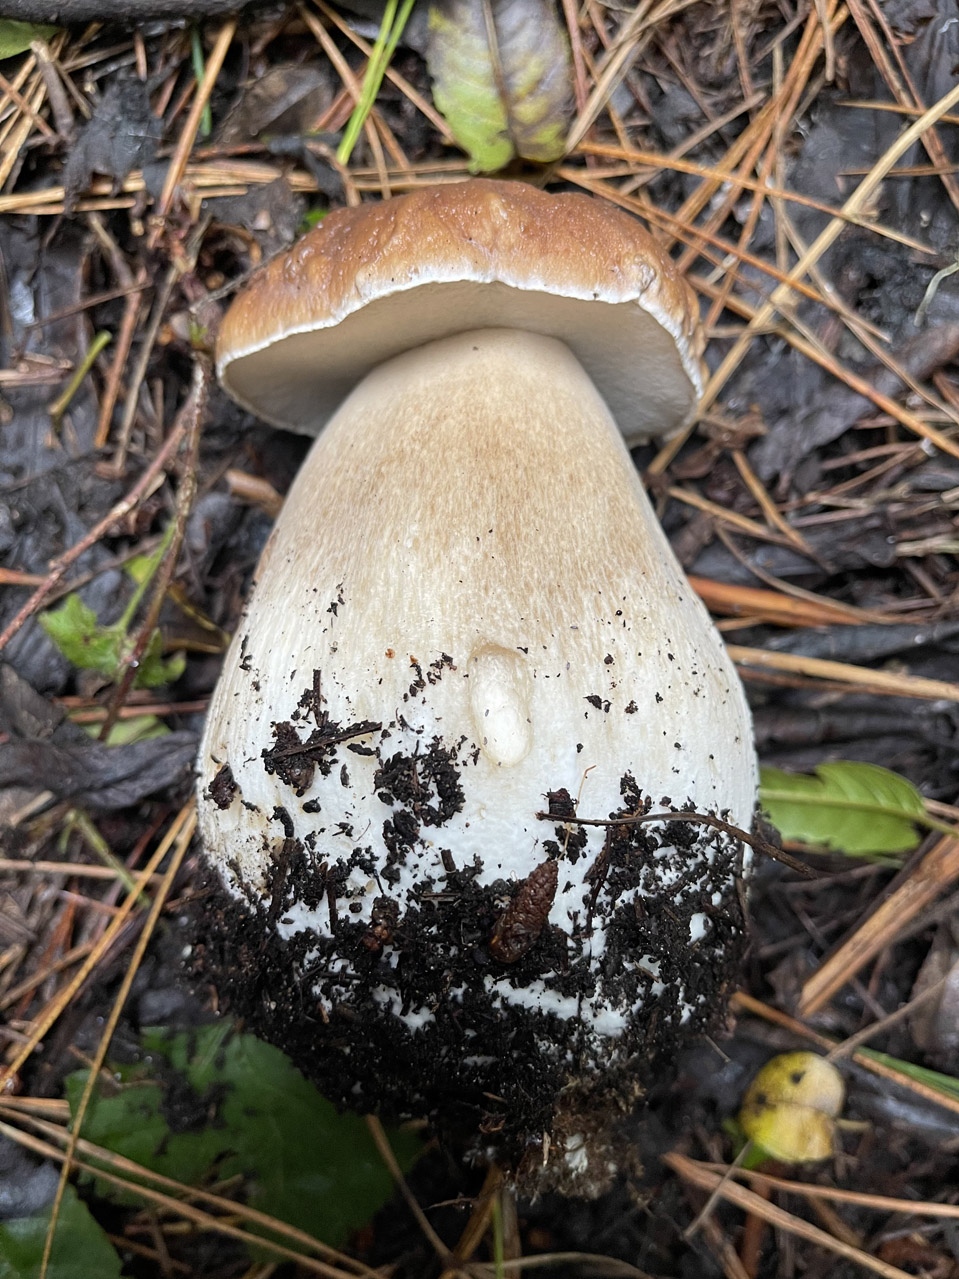 A picture containing fungus, grass, outdoorDescription automatically generated